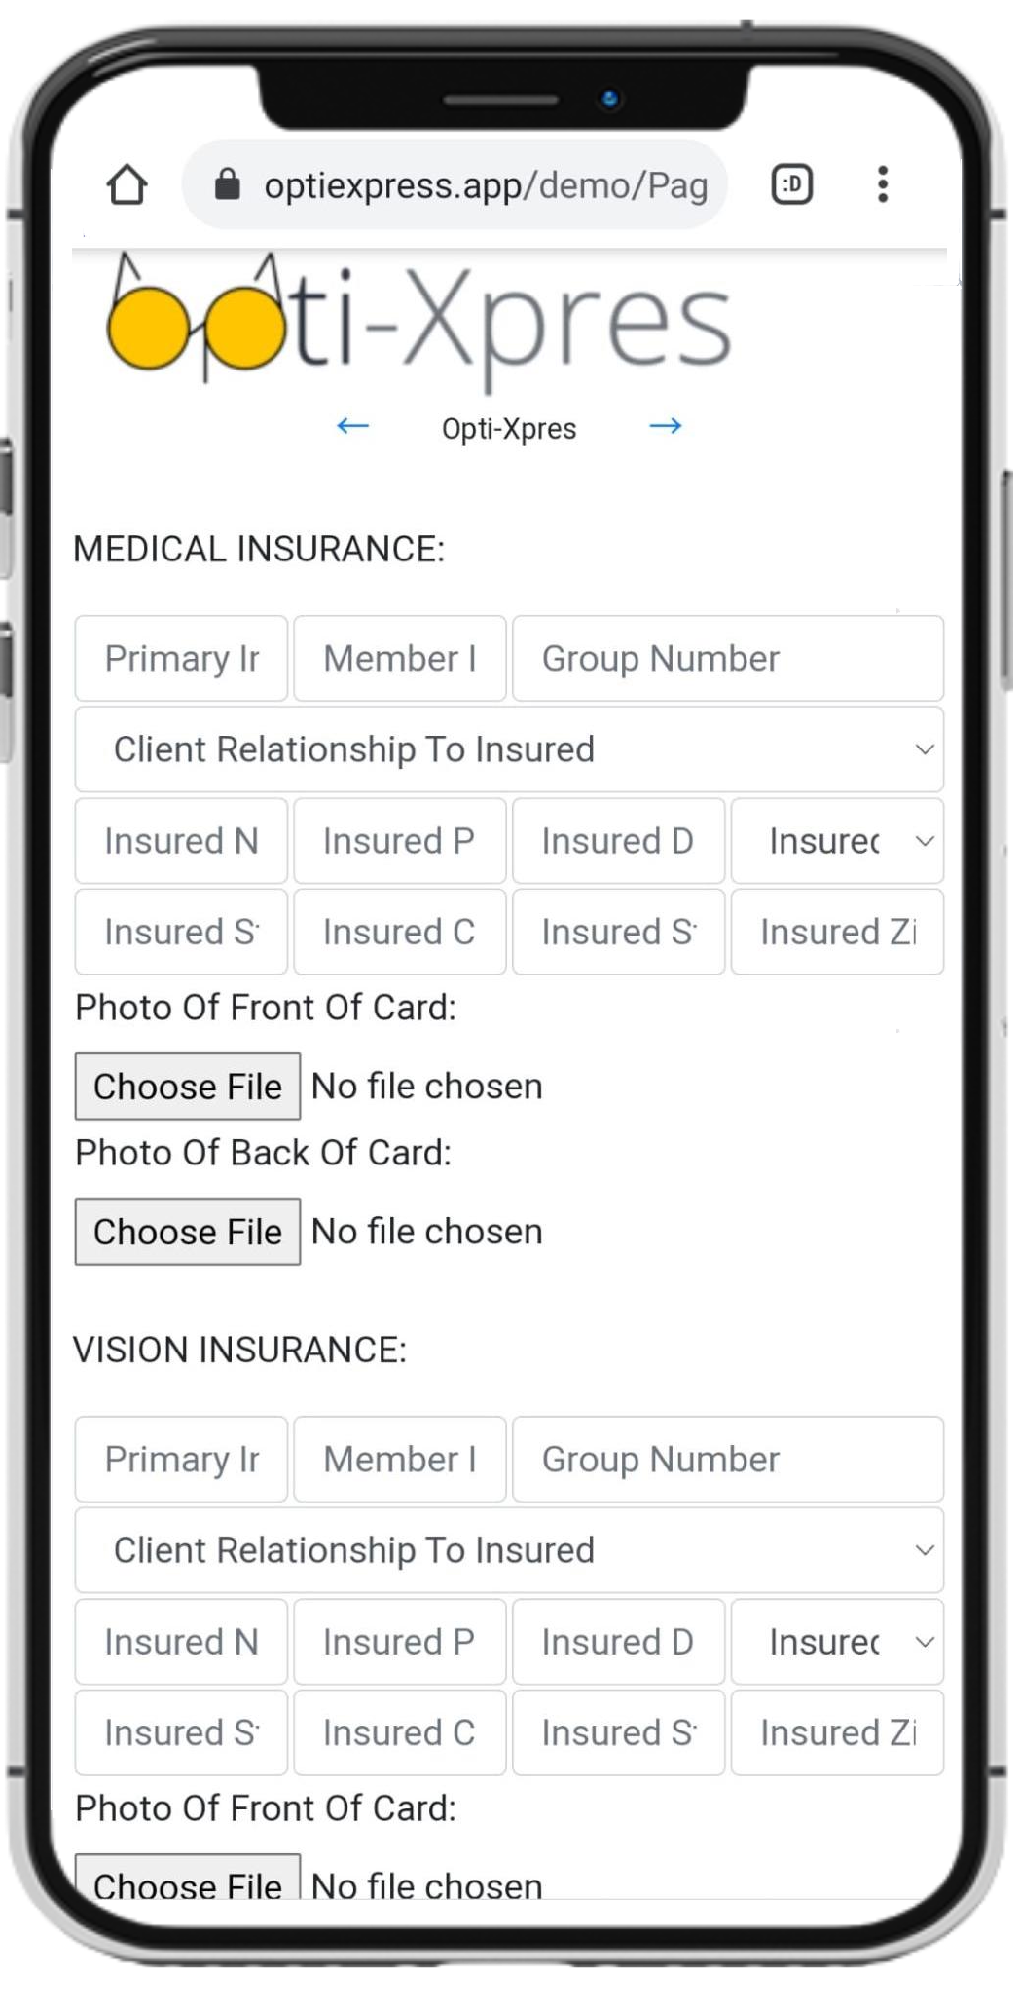 5Collection of insurance information